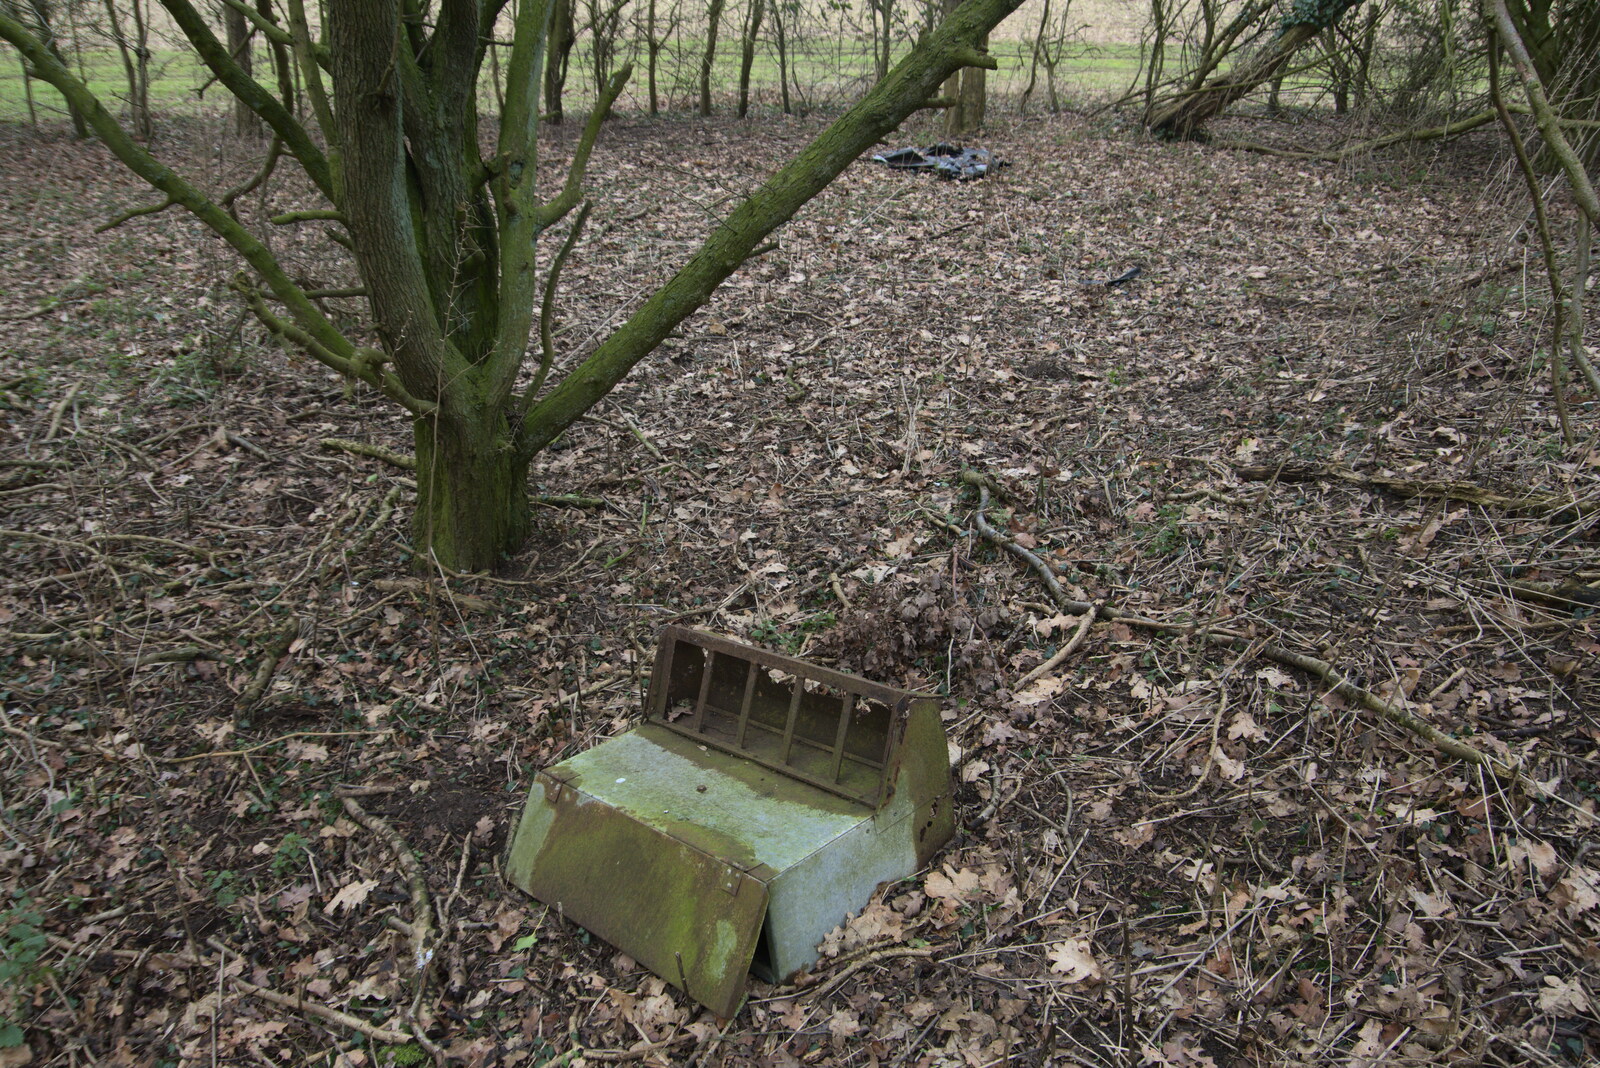 Some other discarded metalwork from The Old Sewage Works, The Avenue, Brome, Suffolk - 20th February 2021